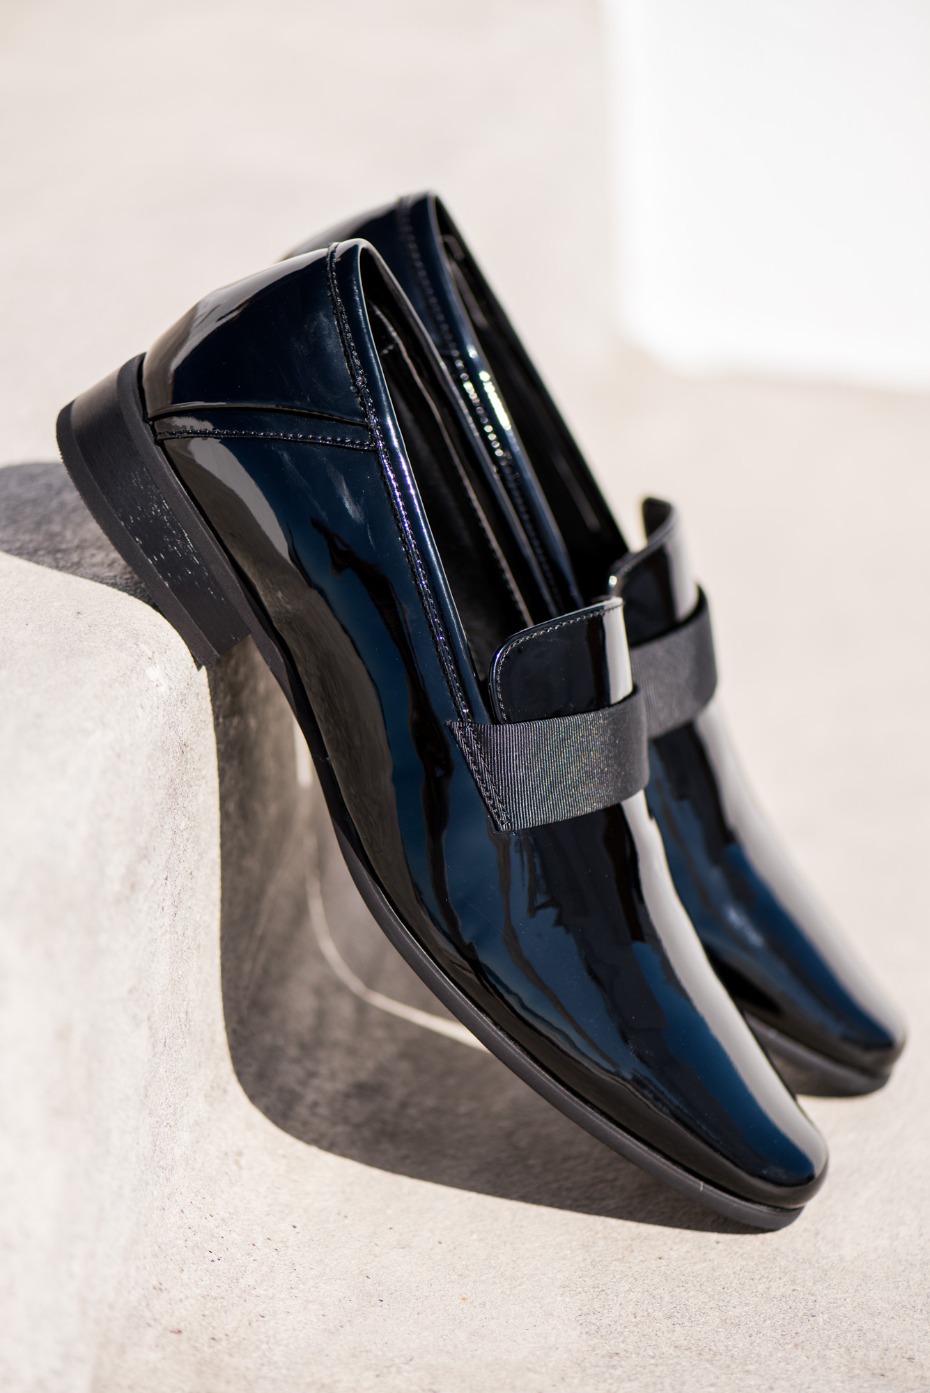 black patent leather shoes from the groom